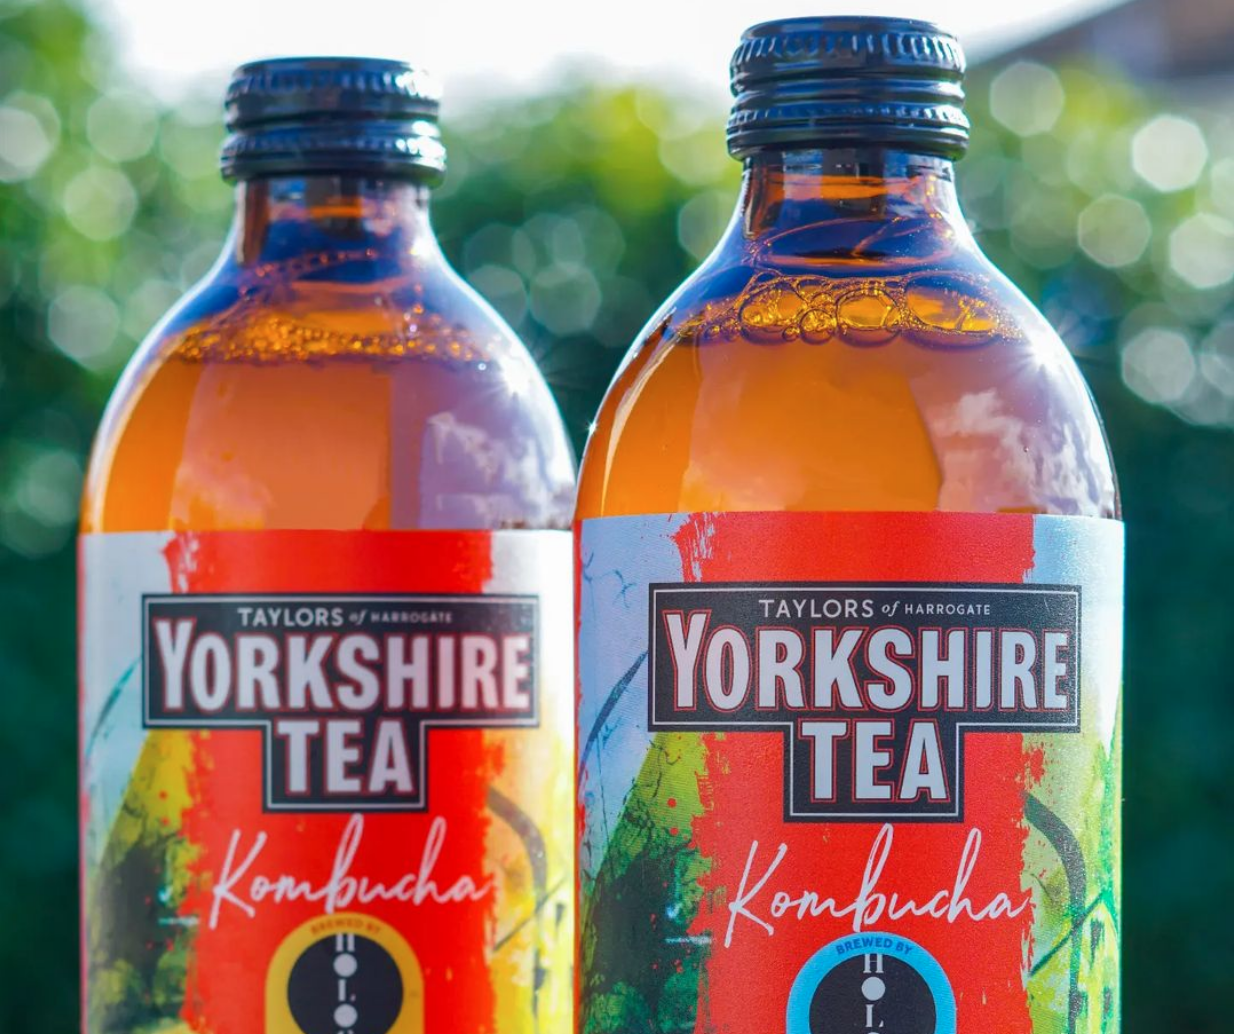 Yorkshire Tea is launching its own kombucha in two flavours - but